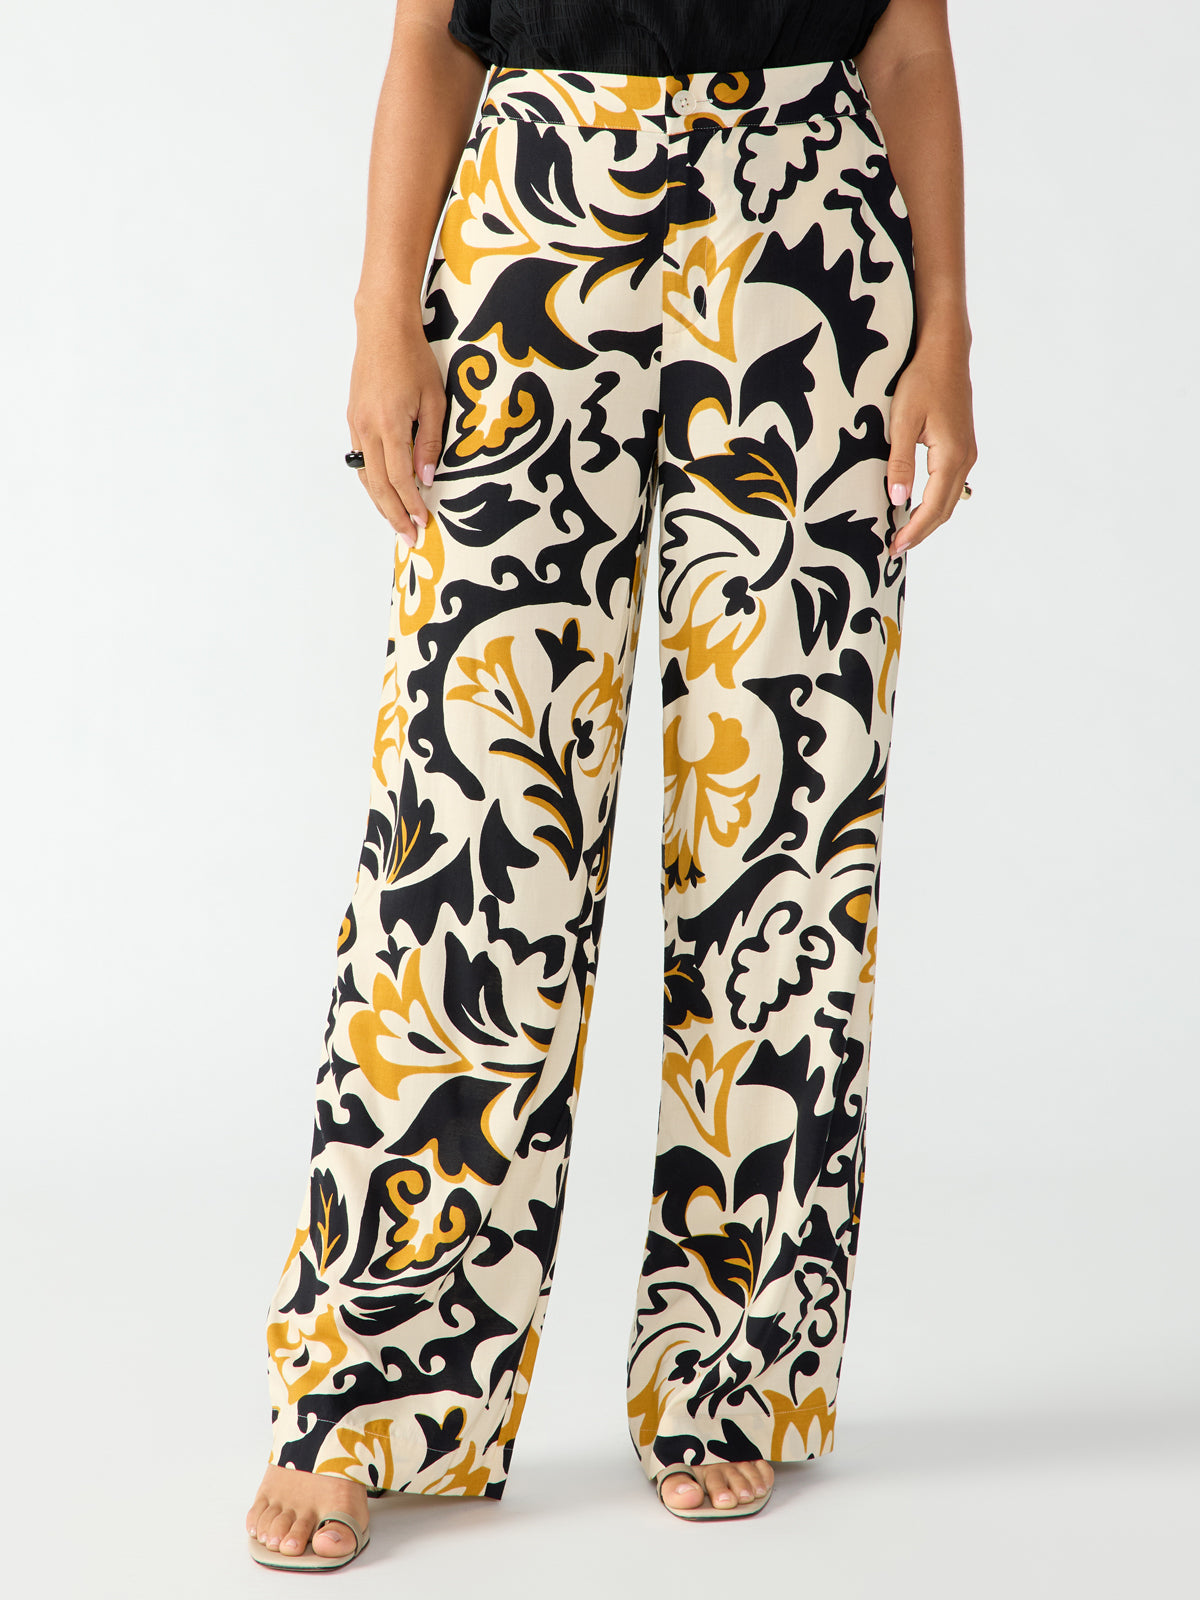 The Soft Trouser Semi High Rise Pant Golden Hour